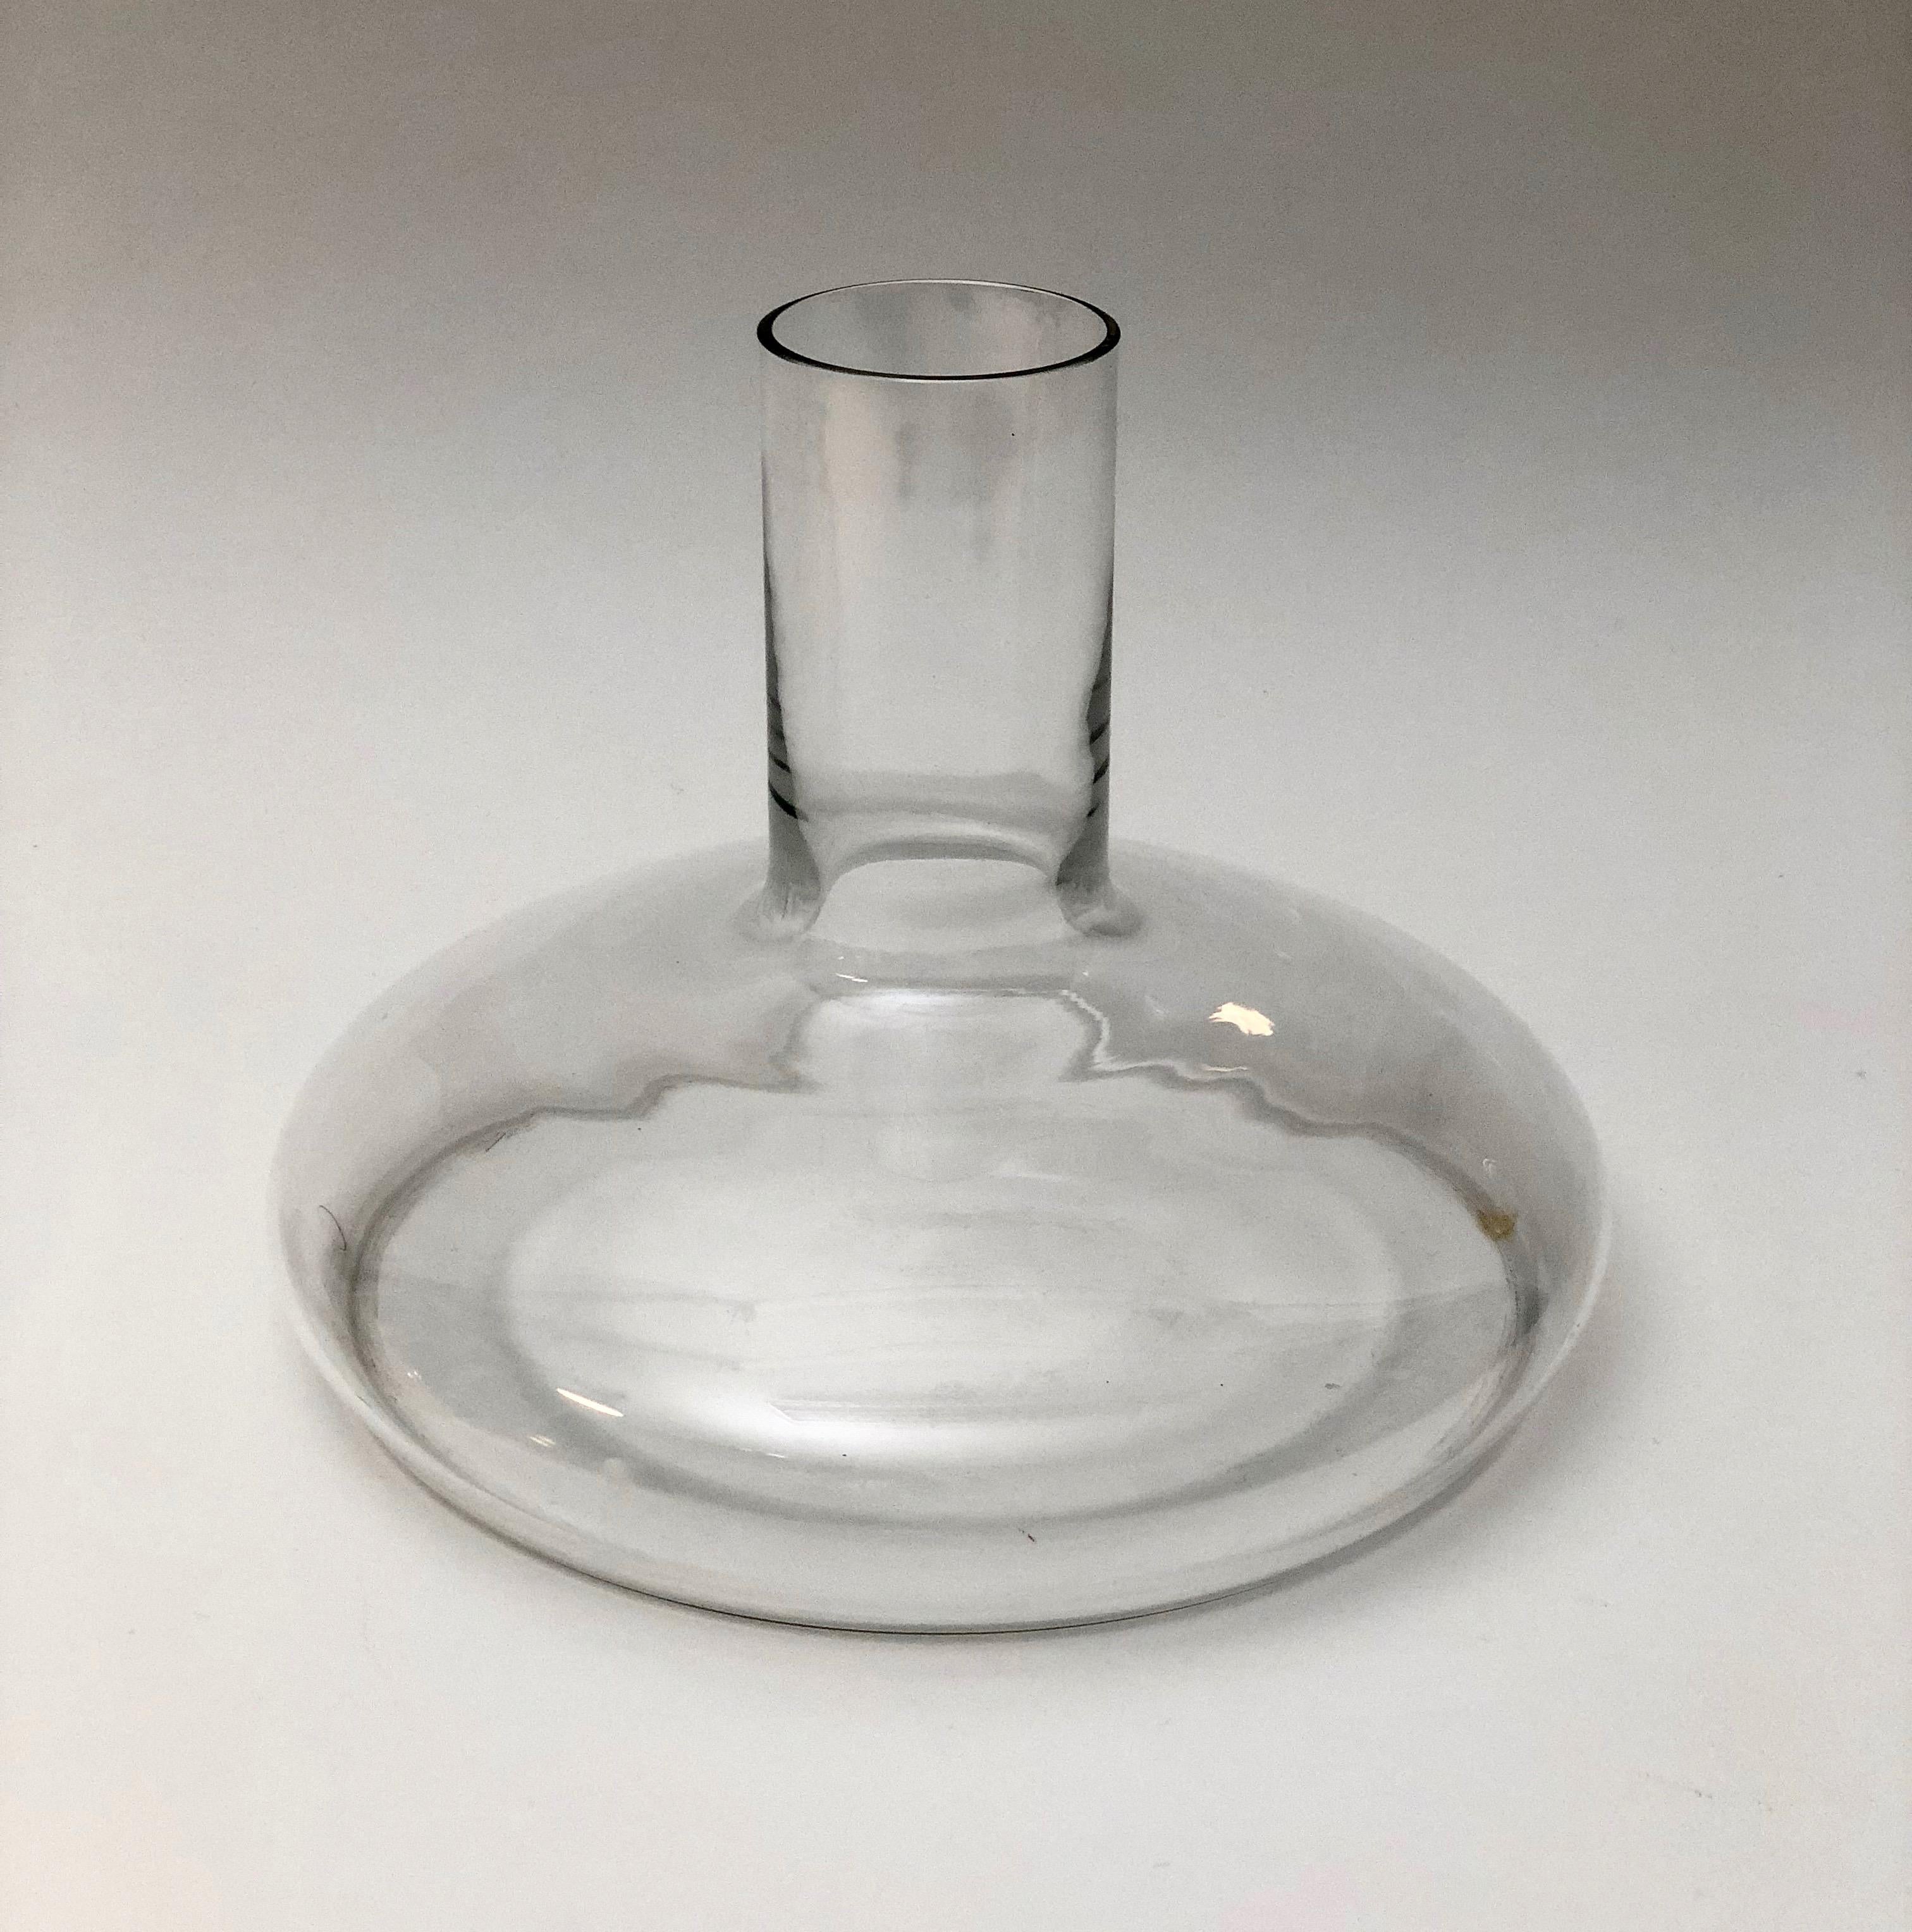 A hand blown glass vase from Carl Auböck, made in the 1950s, From Vienna, Austria.